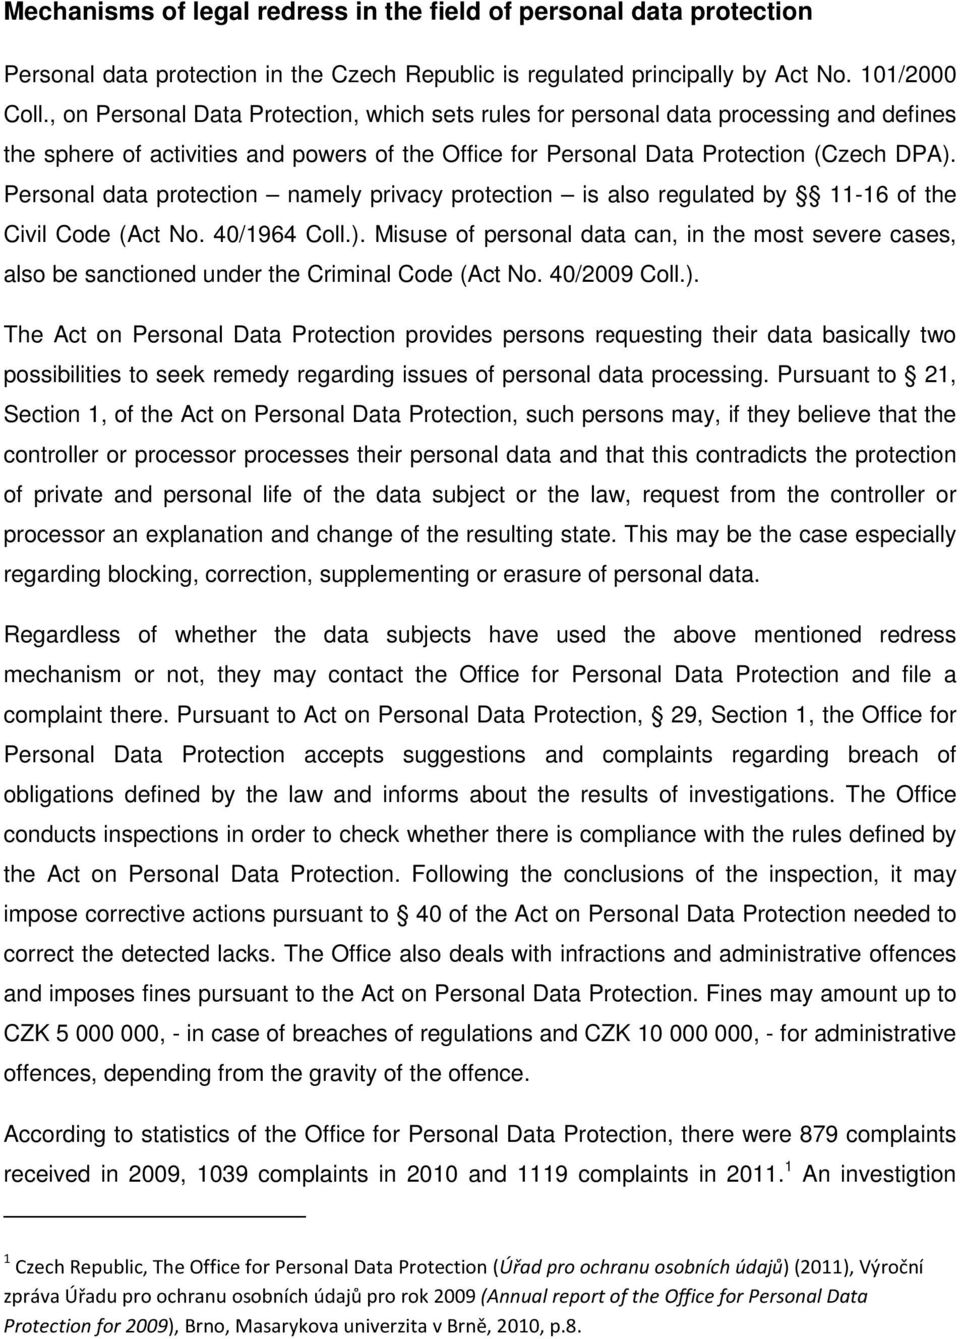 Personal data protection namely privacy protection is also regulated by 11-16 of the Civil Code (Act No. 40/1964 Coll.).